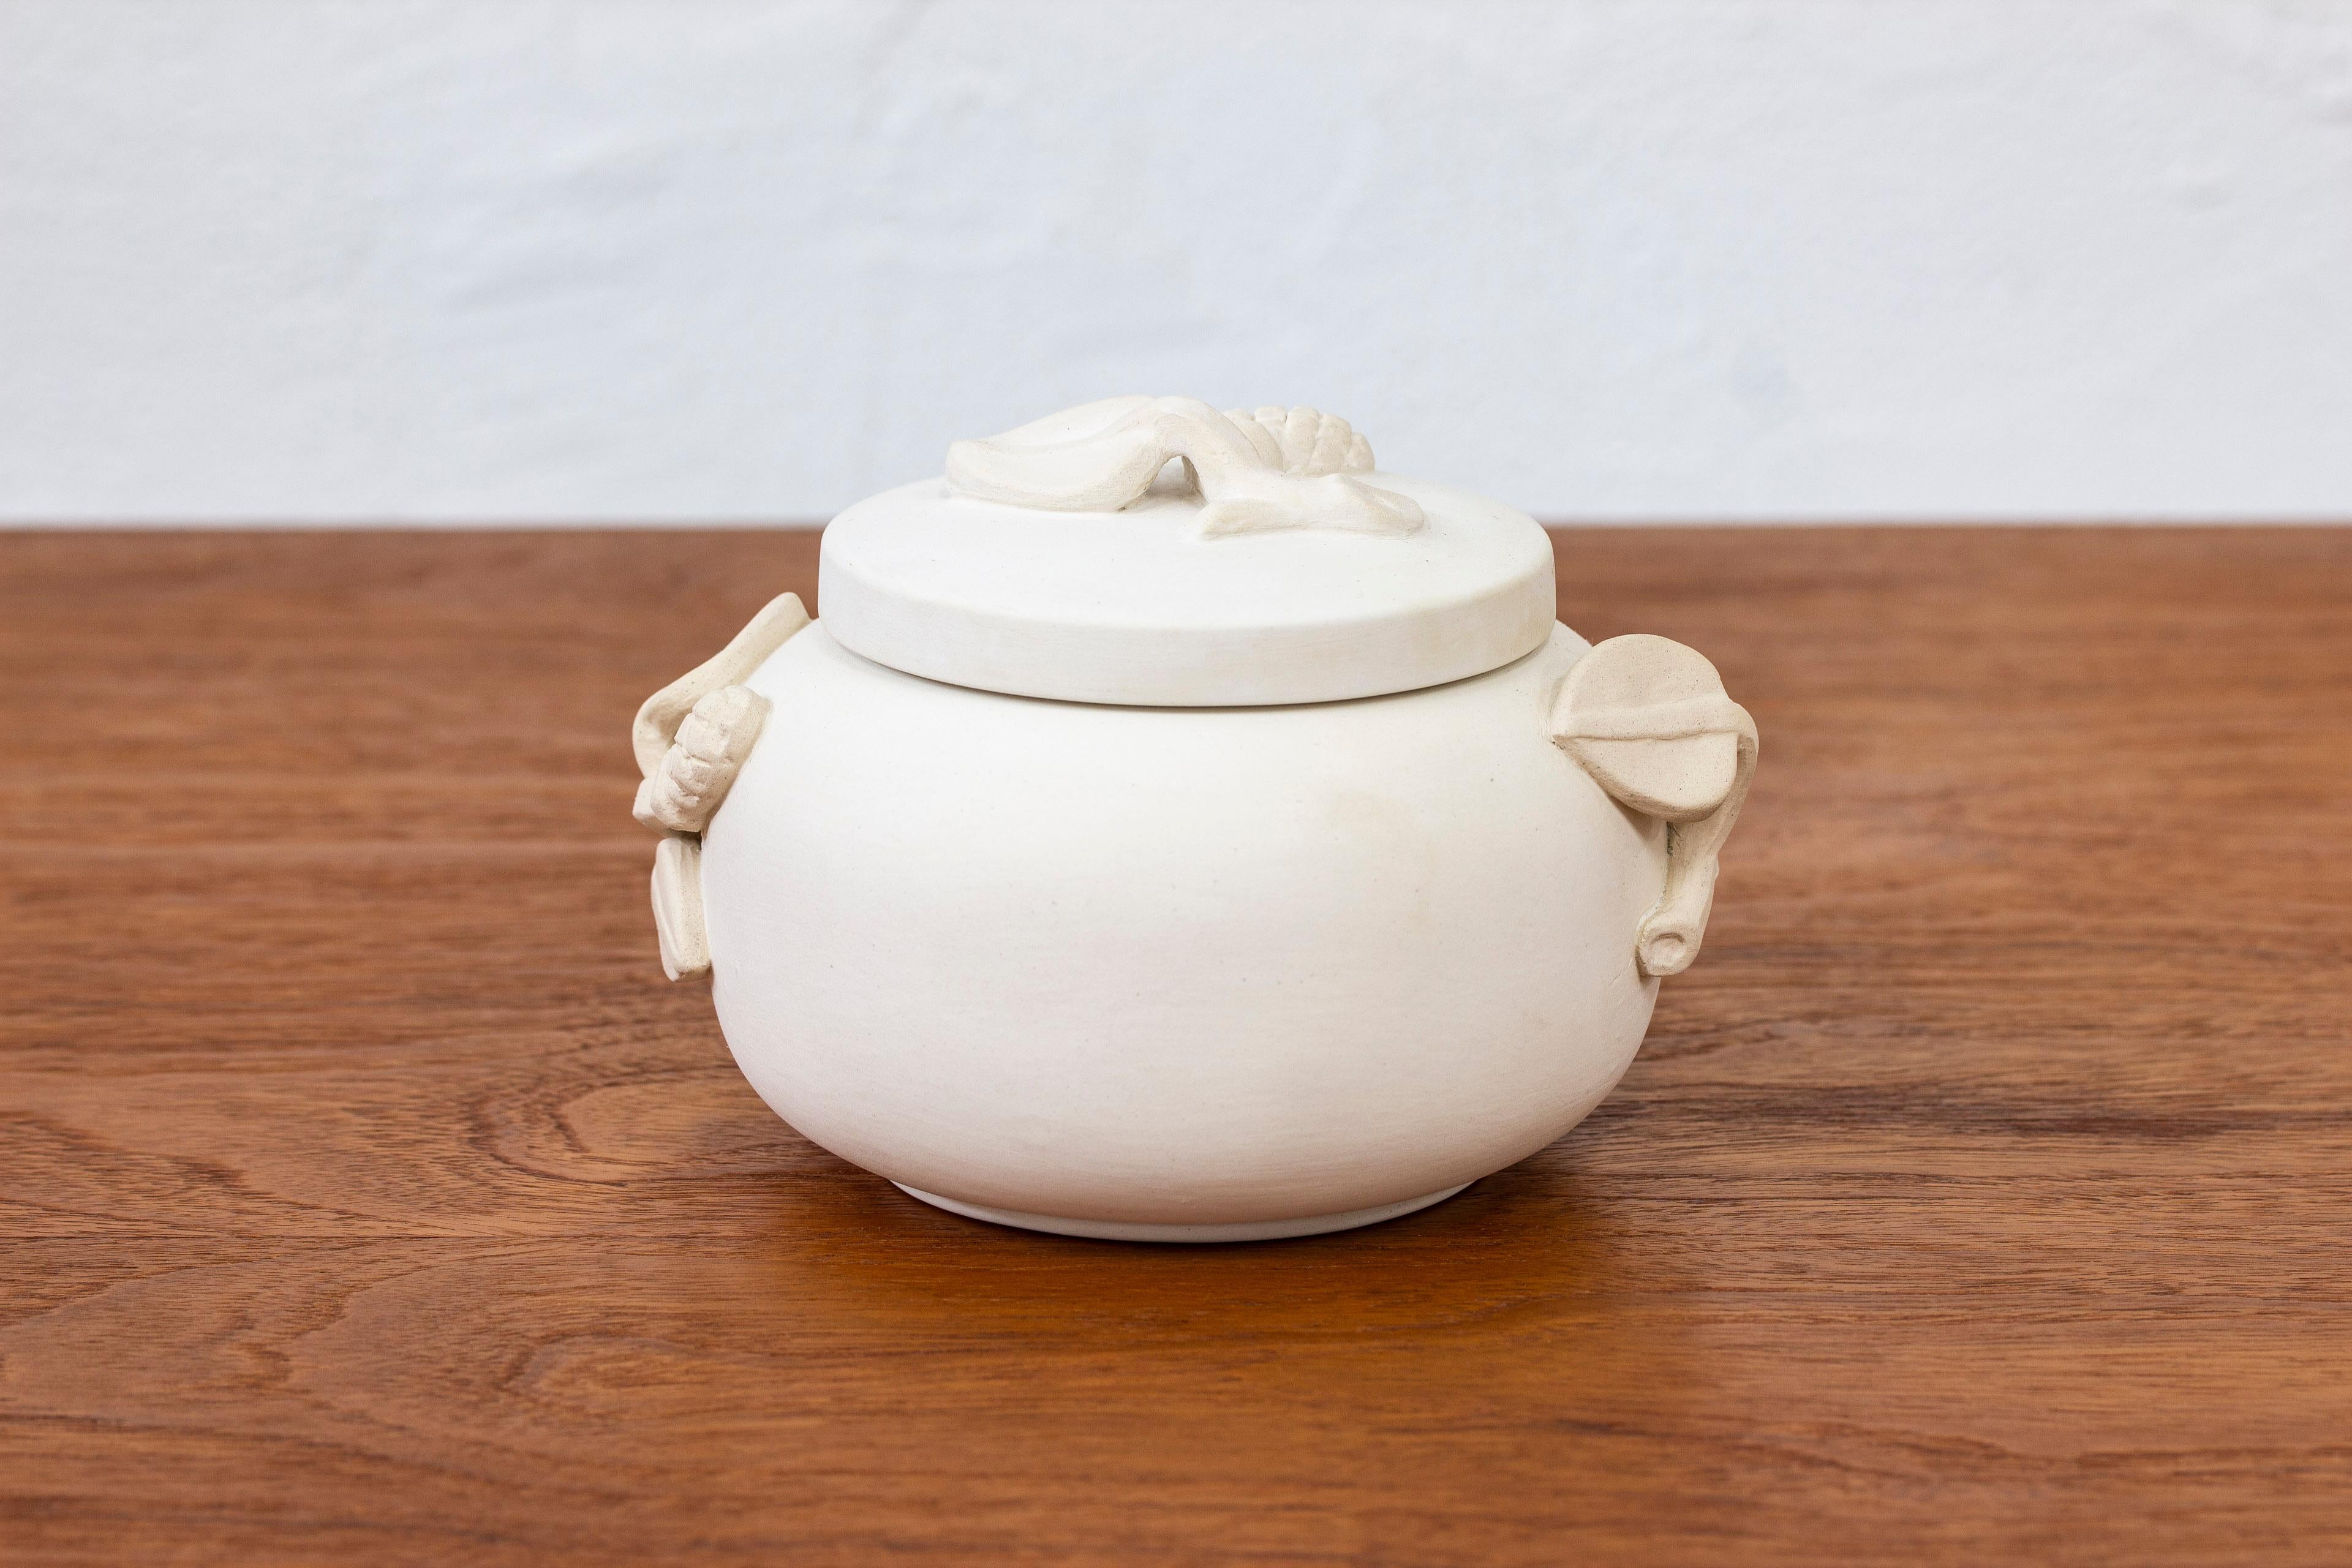 Lidded jar from the 